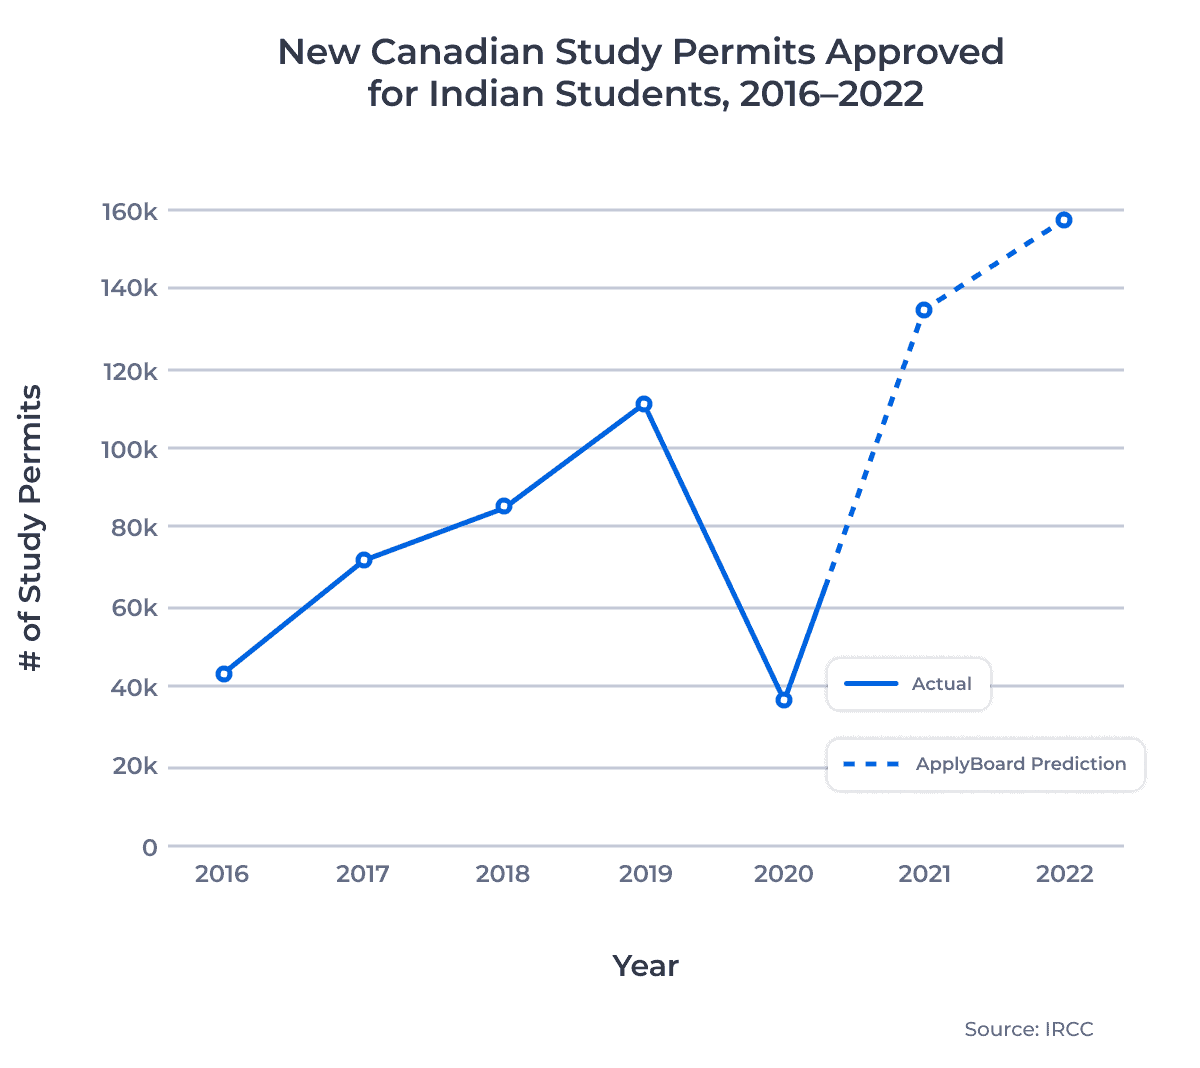 Line chart showing the number of new Canadian study permit approvals for Indian students from 2016 to 2020, and projecting into 2021 and 2022.